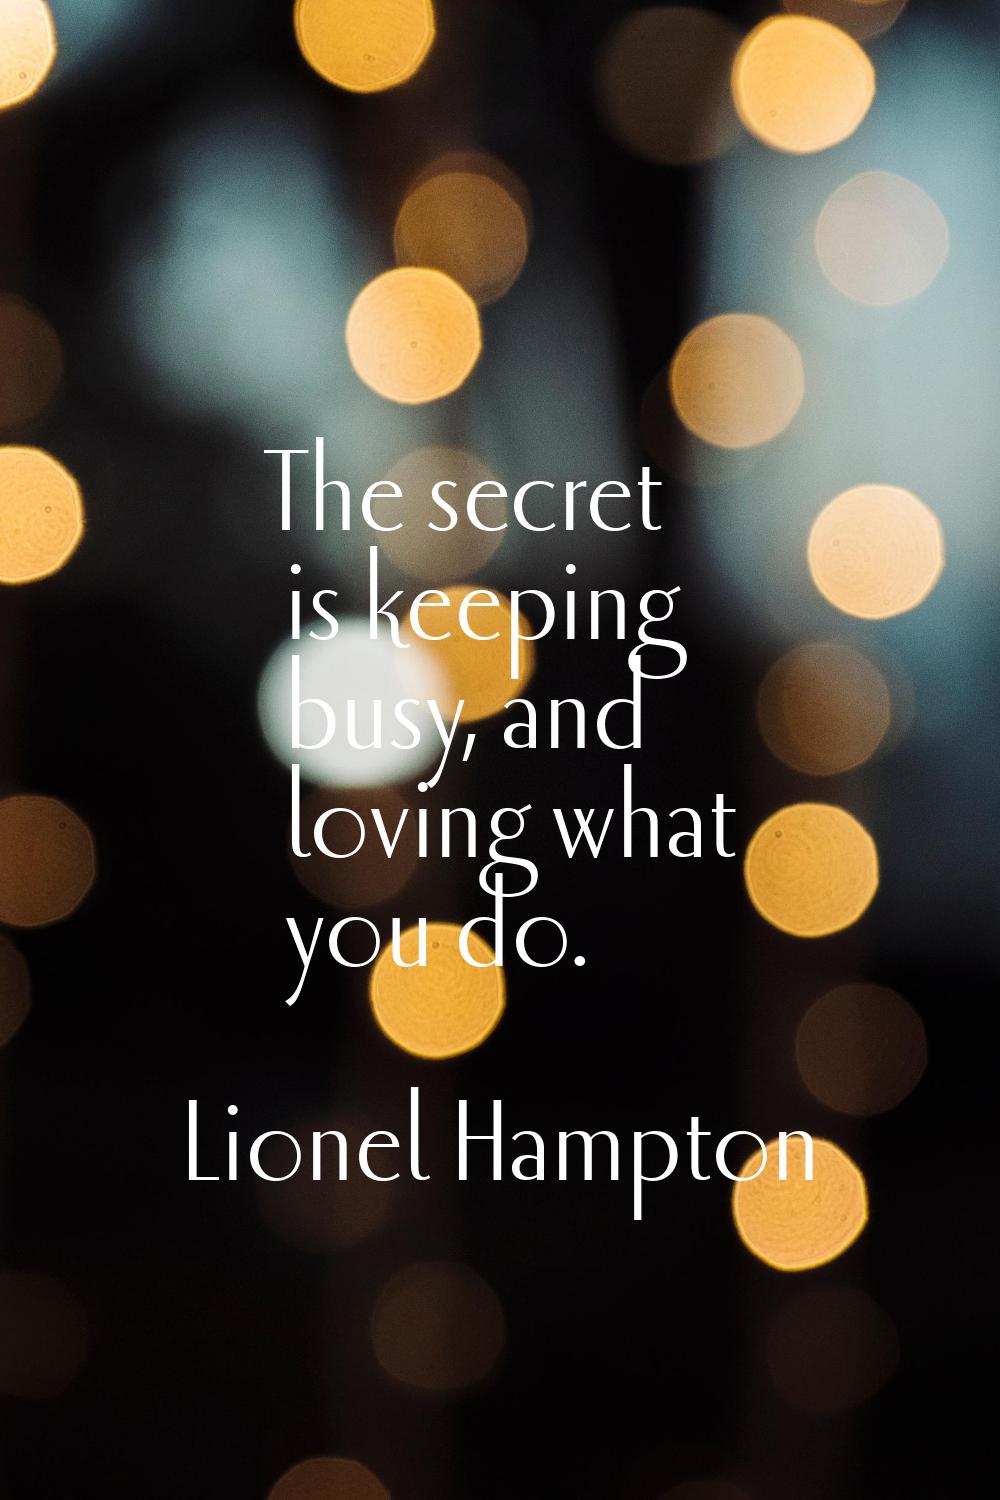 The secret is keeping busy, and loving what you do.